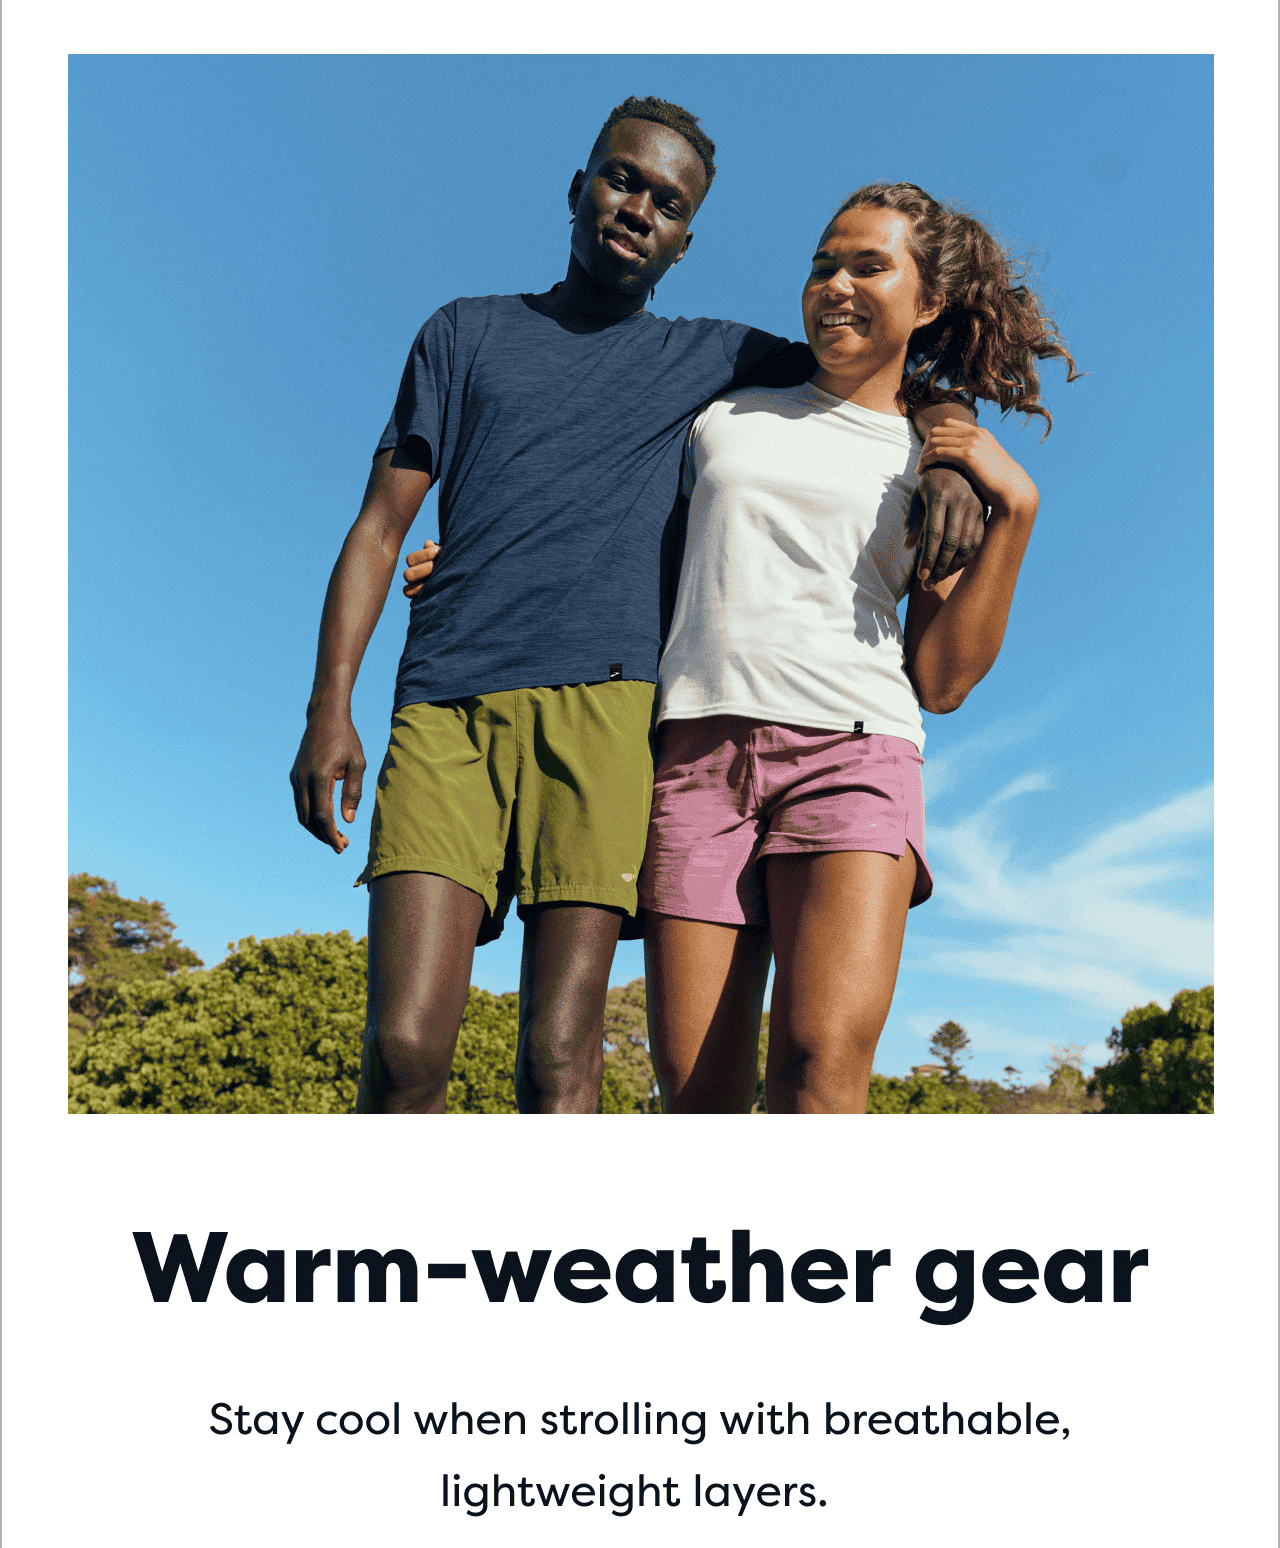 Warm-weather gear | Stay cool when strolling with breathable, lightweight layers.